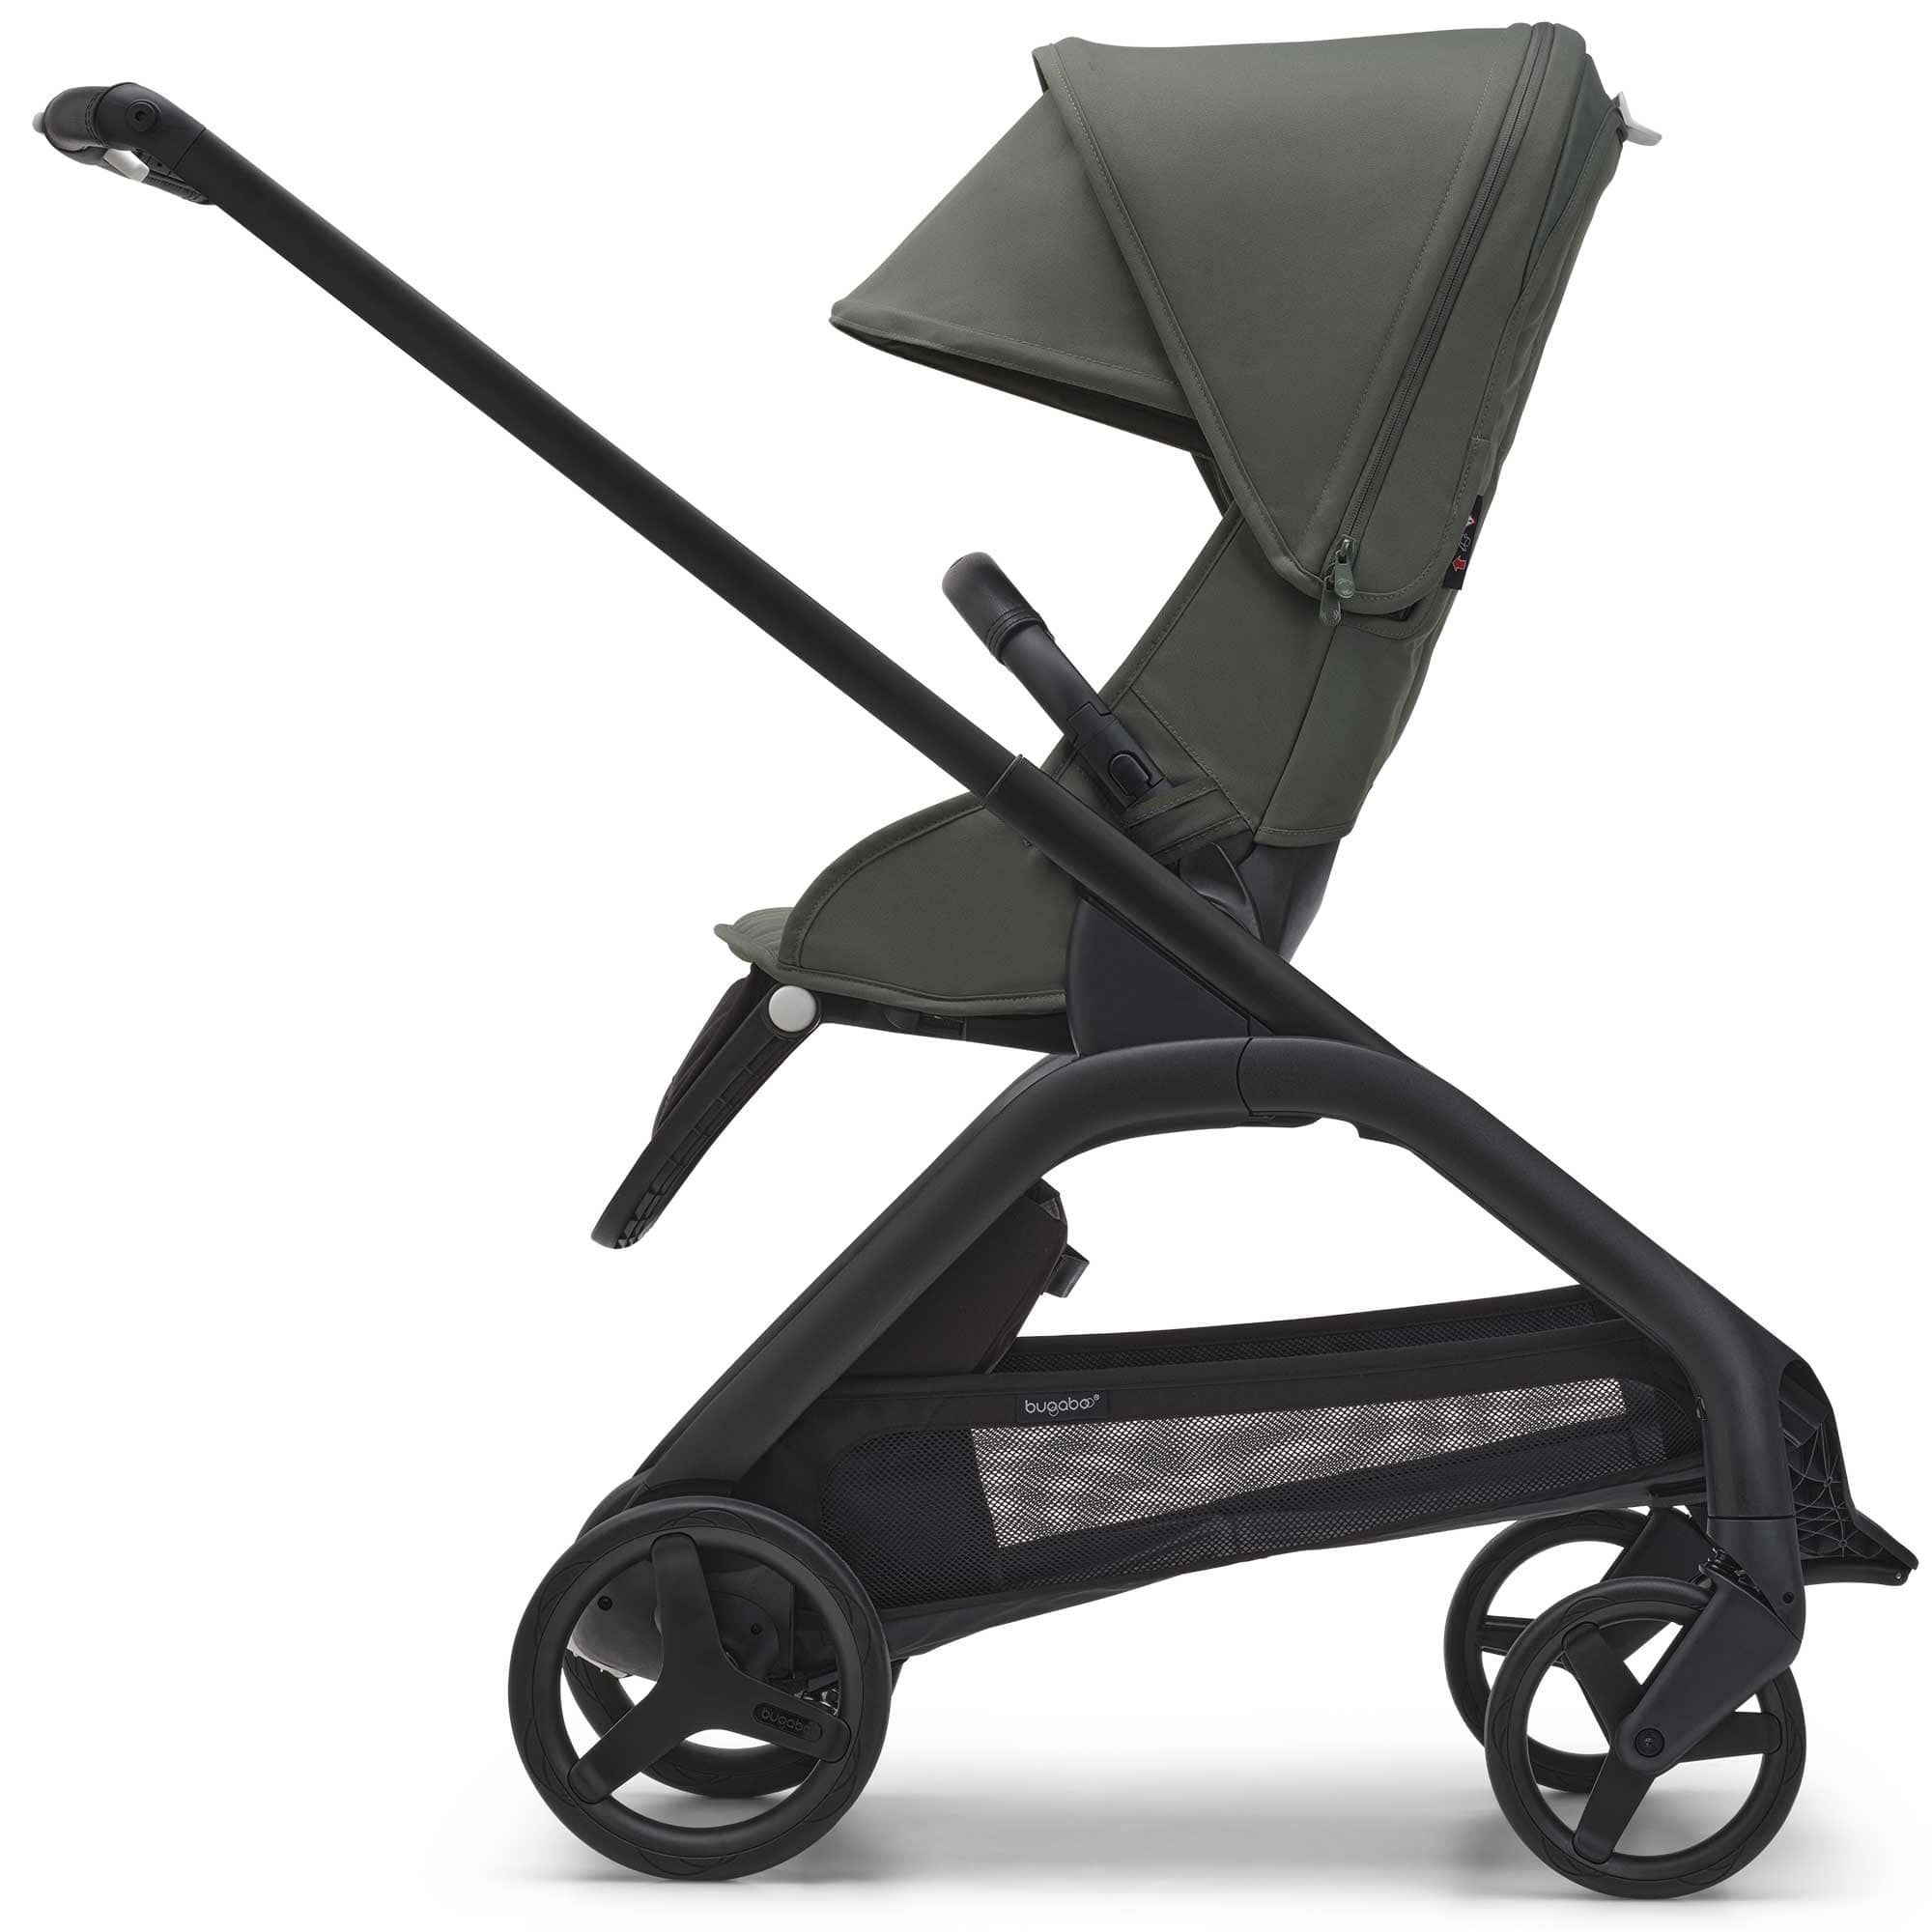 Bugaboo Baby Prams Bugaboo Dragonfly Complete Bundle - Black/Forest Green 13814-BLK-FOR-GRN